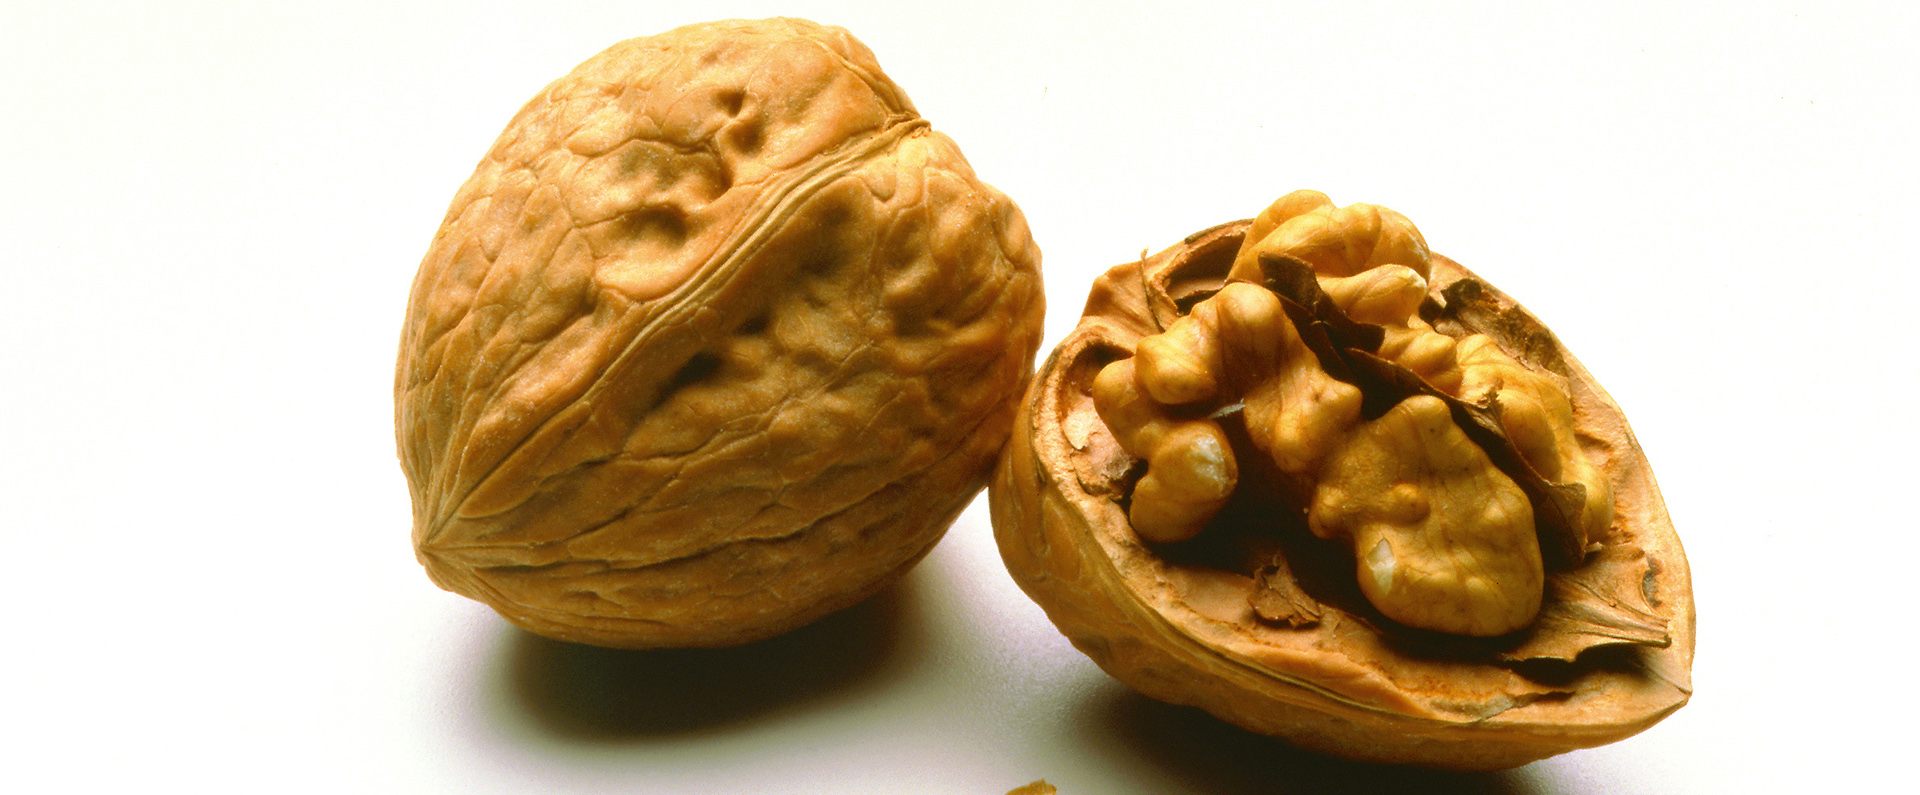 A walnut in the shell